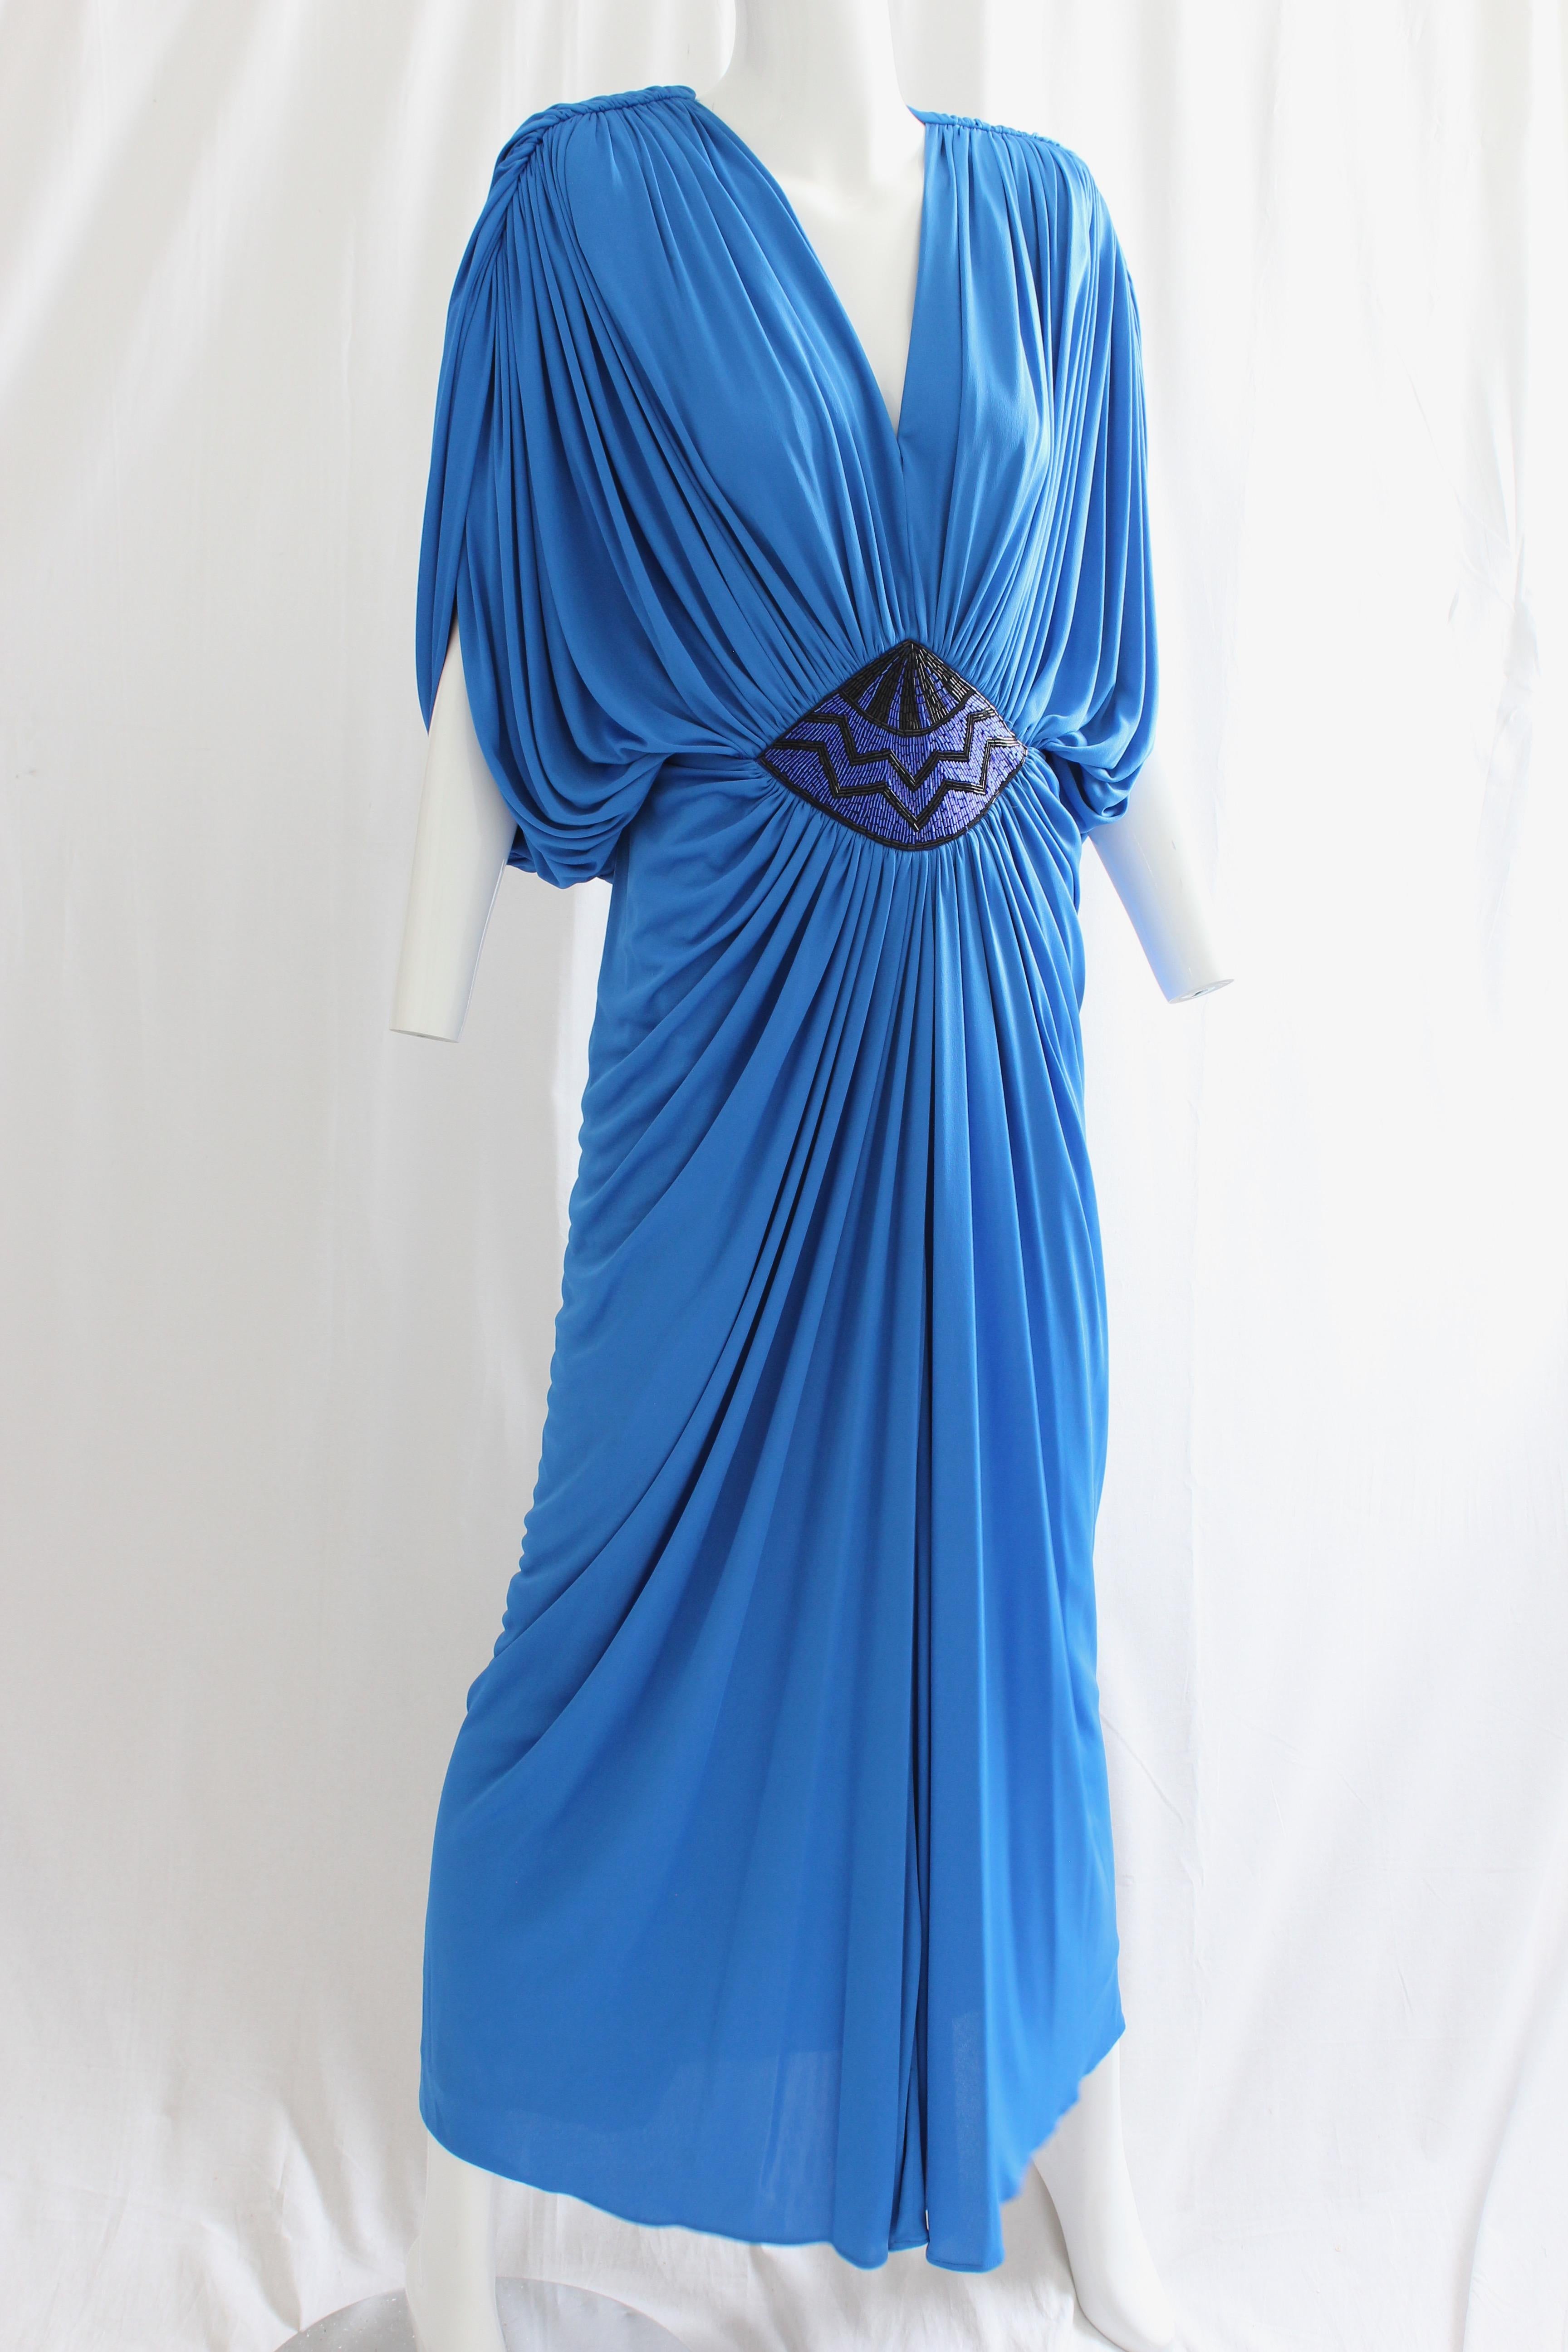 Blue Tadashi Early Draped Cerulean Goddess Evening Gown With Embellished Waist 